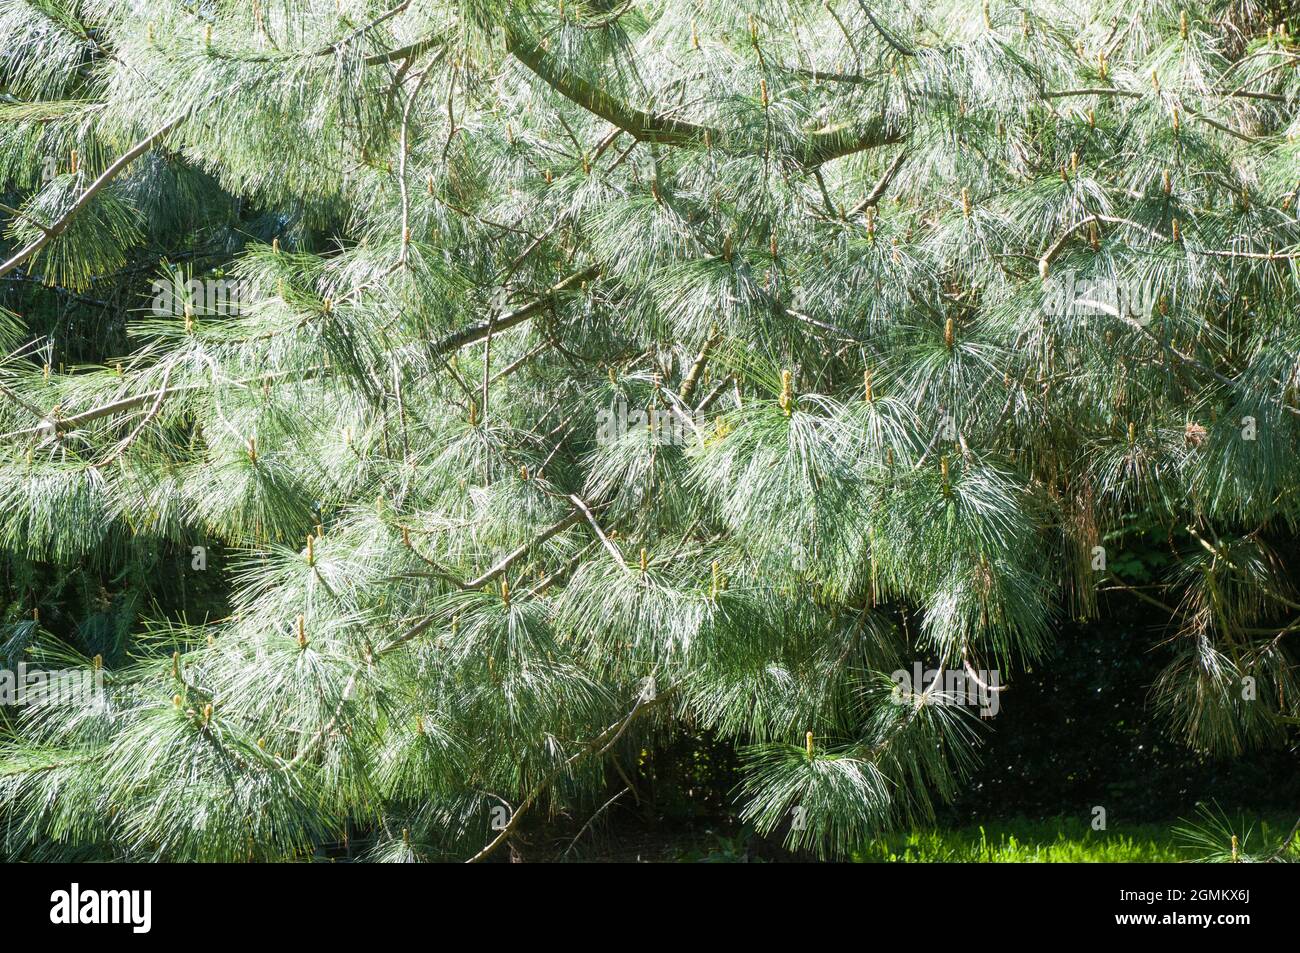 Pinus Wallichiana or Bhutan Pine a coniuferous evergreen tree with grey green to grey blue leaves or needles and is fully hardy also Himalayan pine Stock Photo